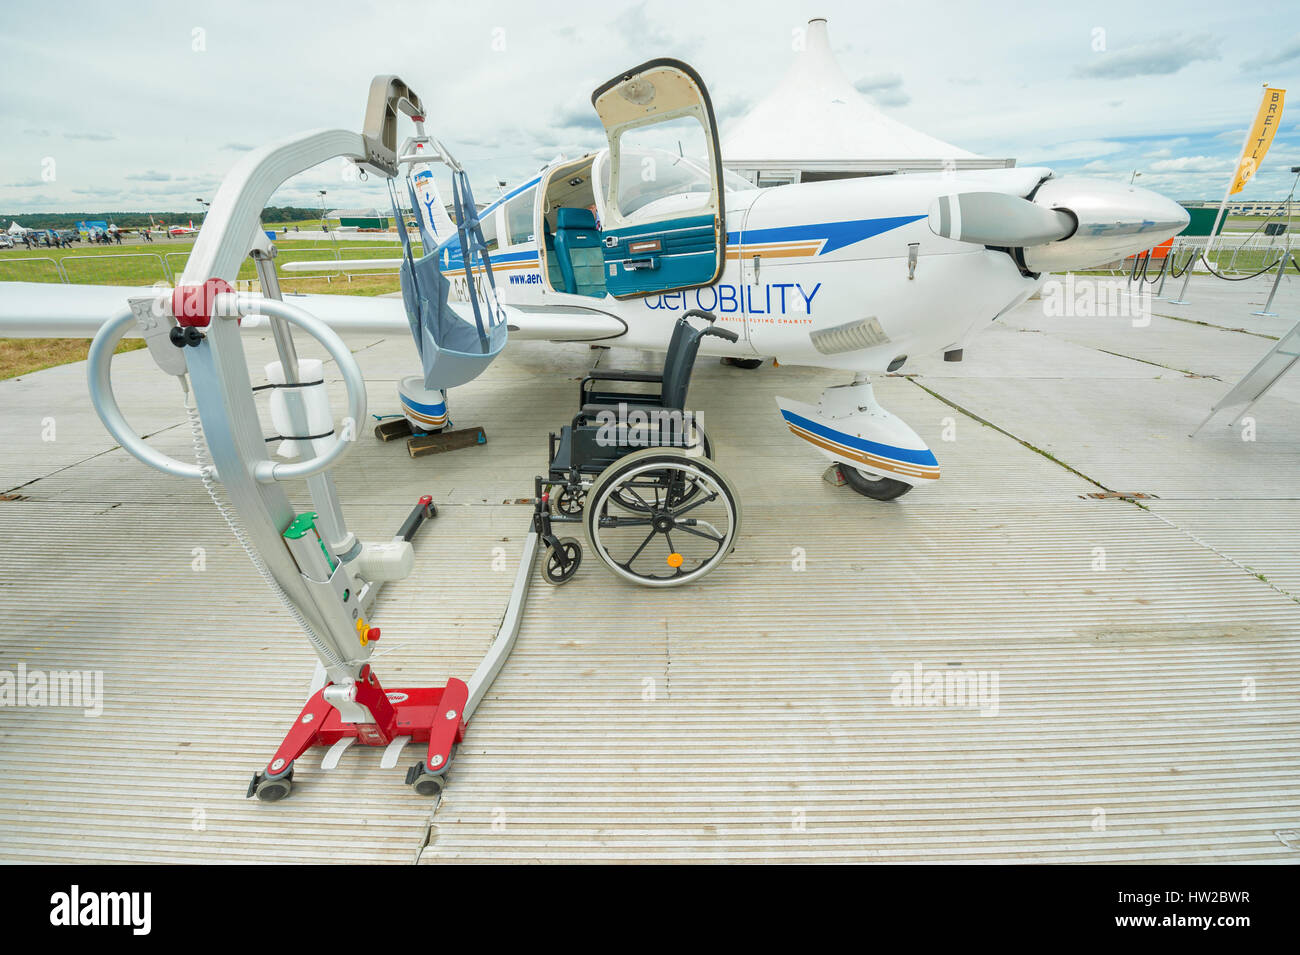 Equipment used by the UK Aerobility charity to assist pilots with disabilities, on display at the Farnborough Airshow Stock Photo